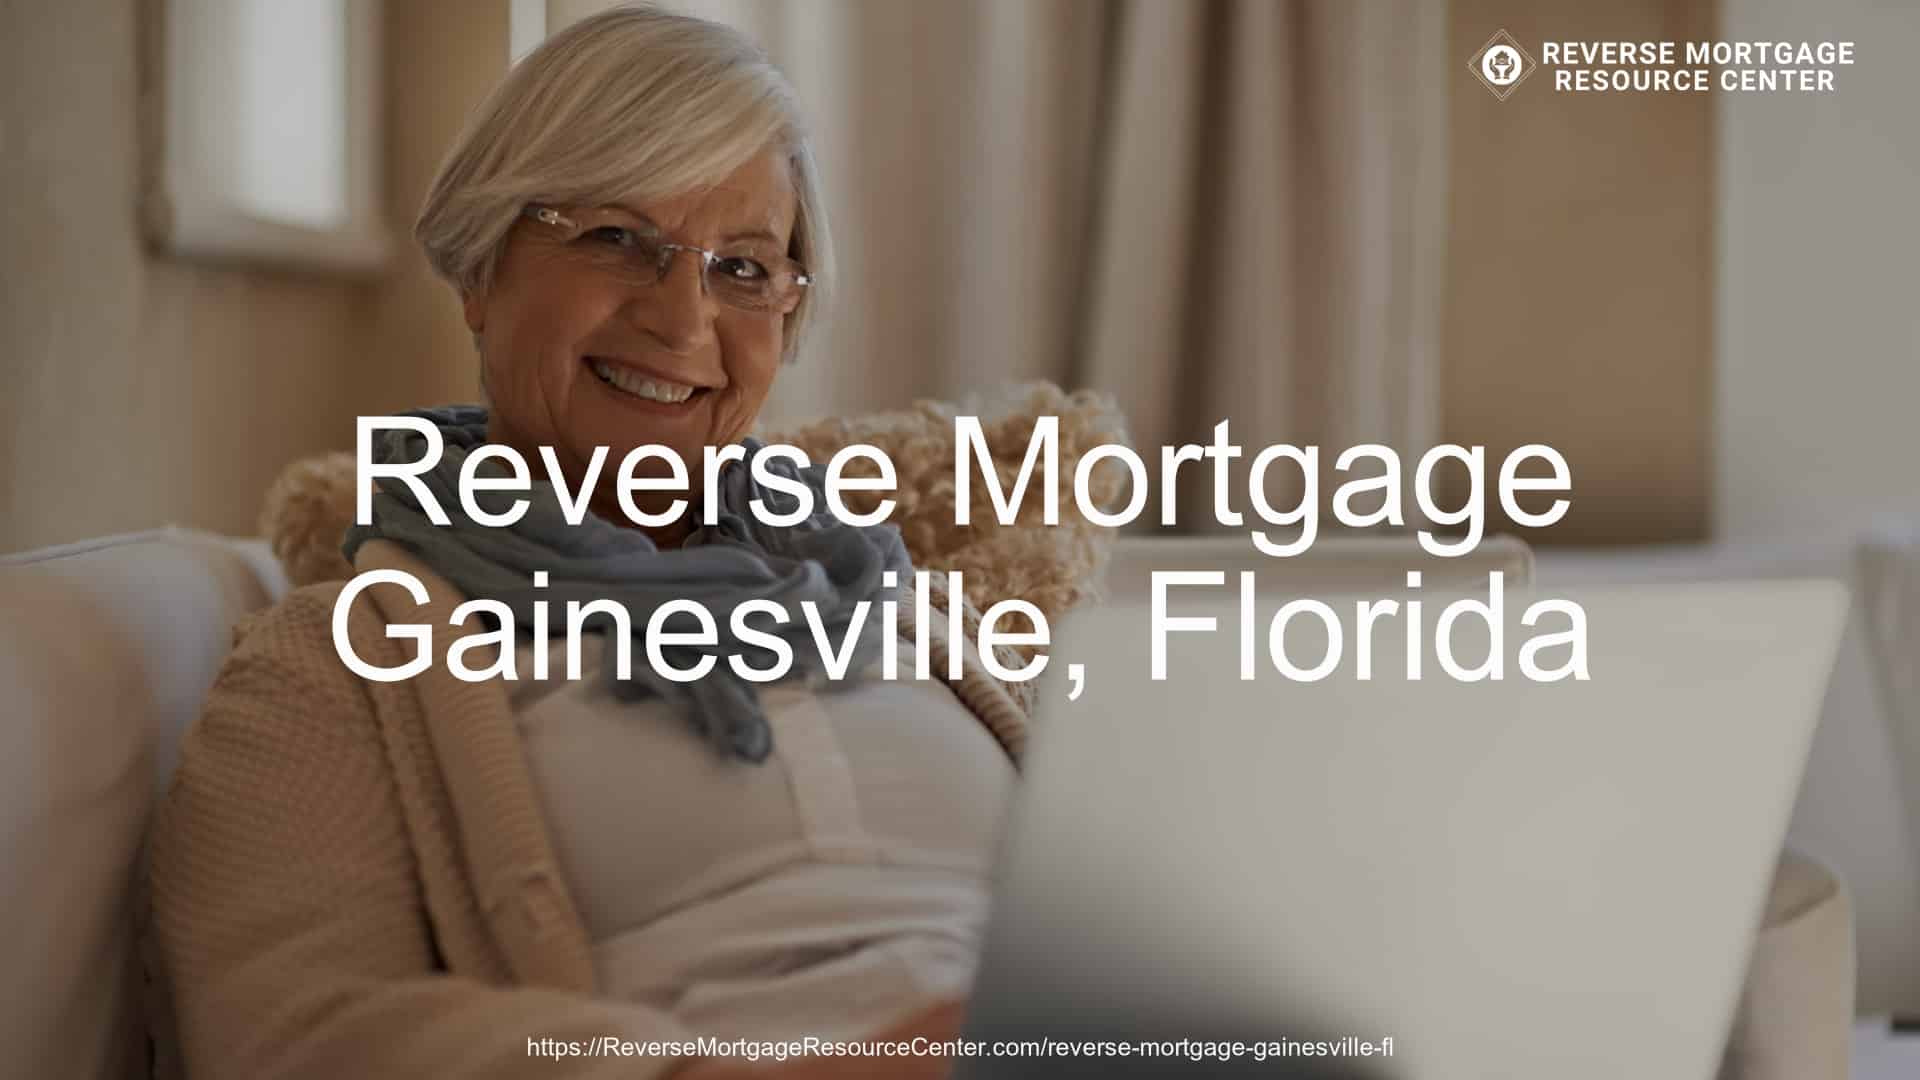 Reverse Mortgage Loans in Gainesville Florida